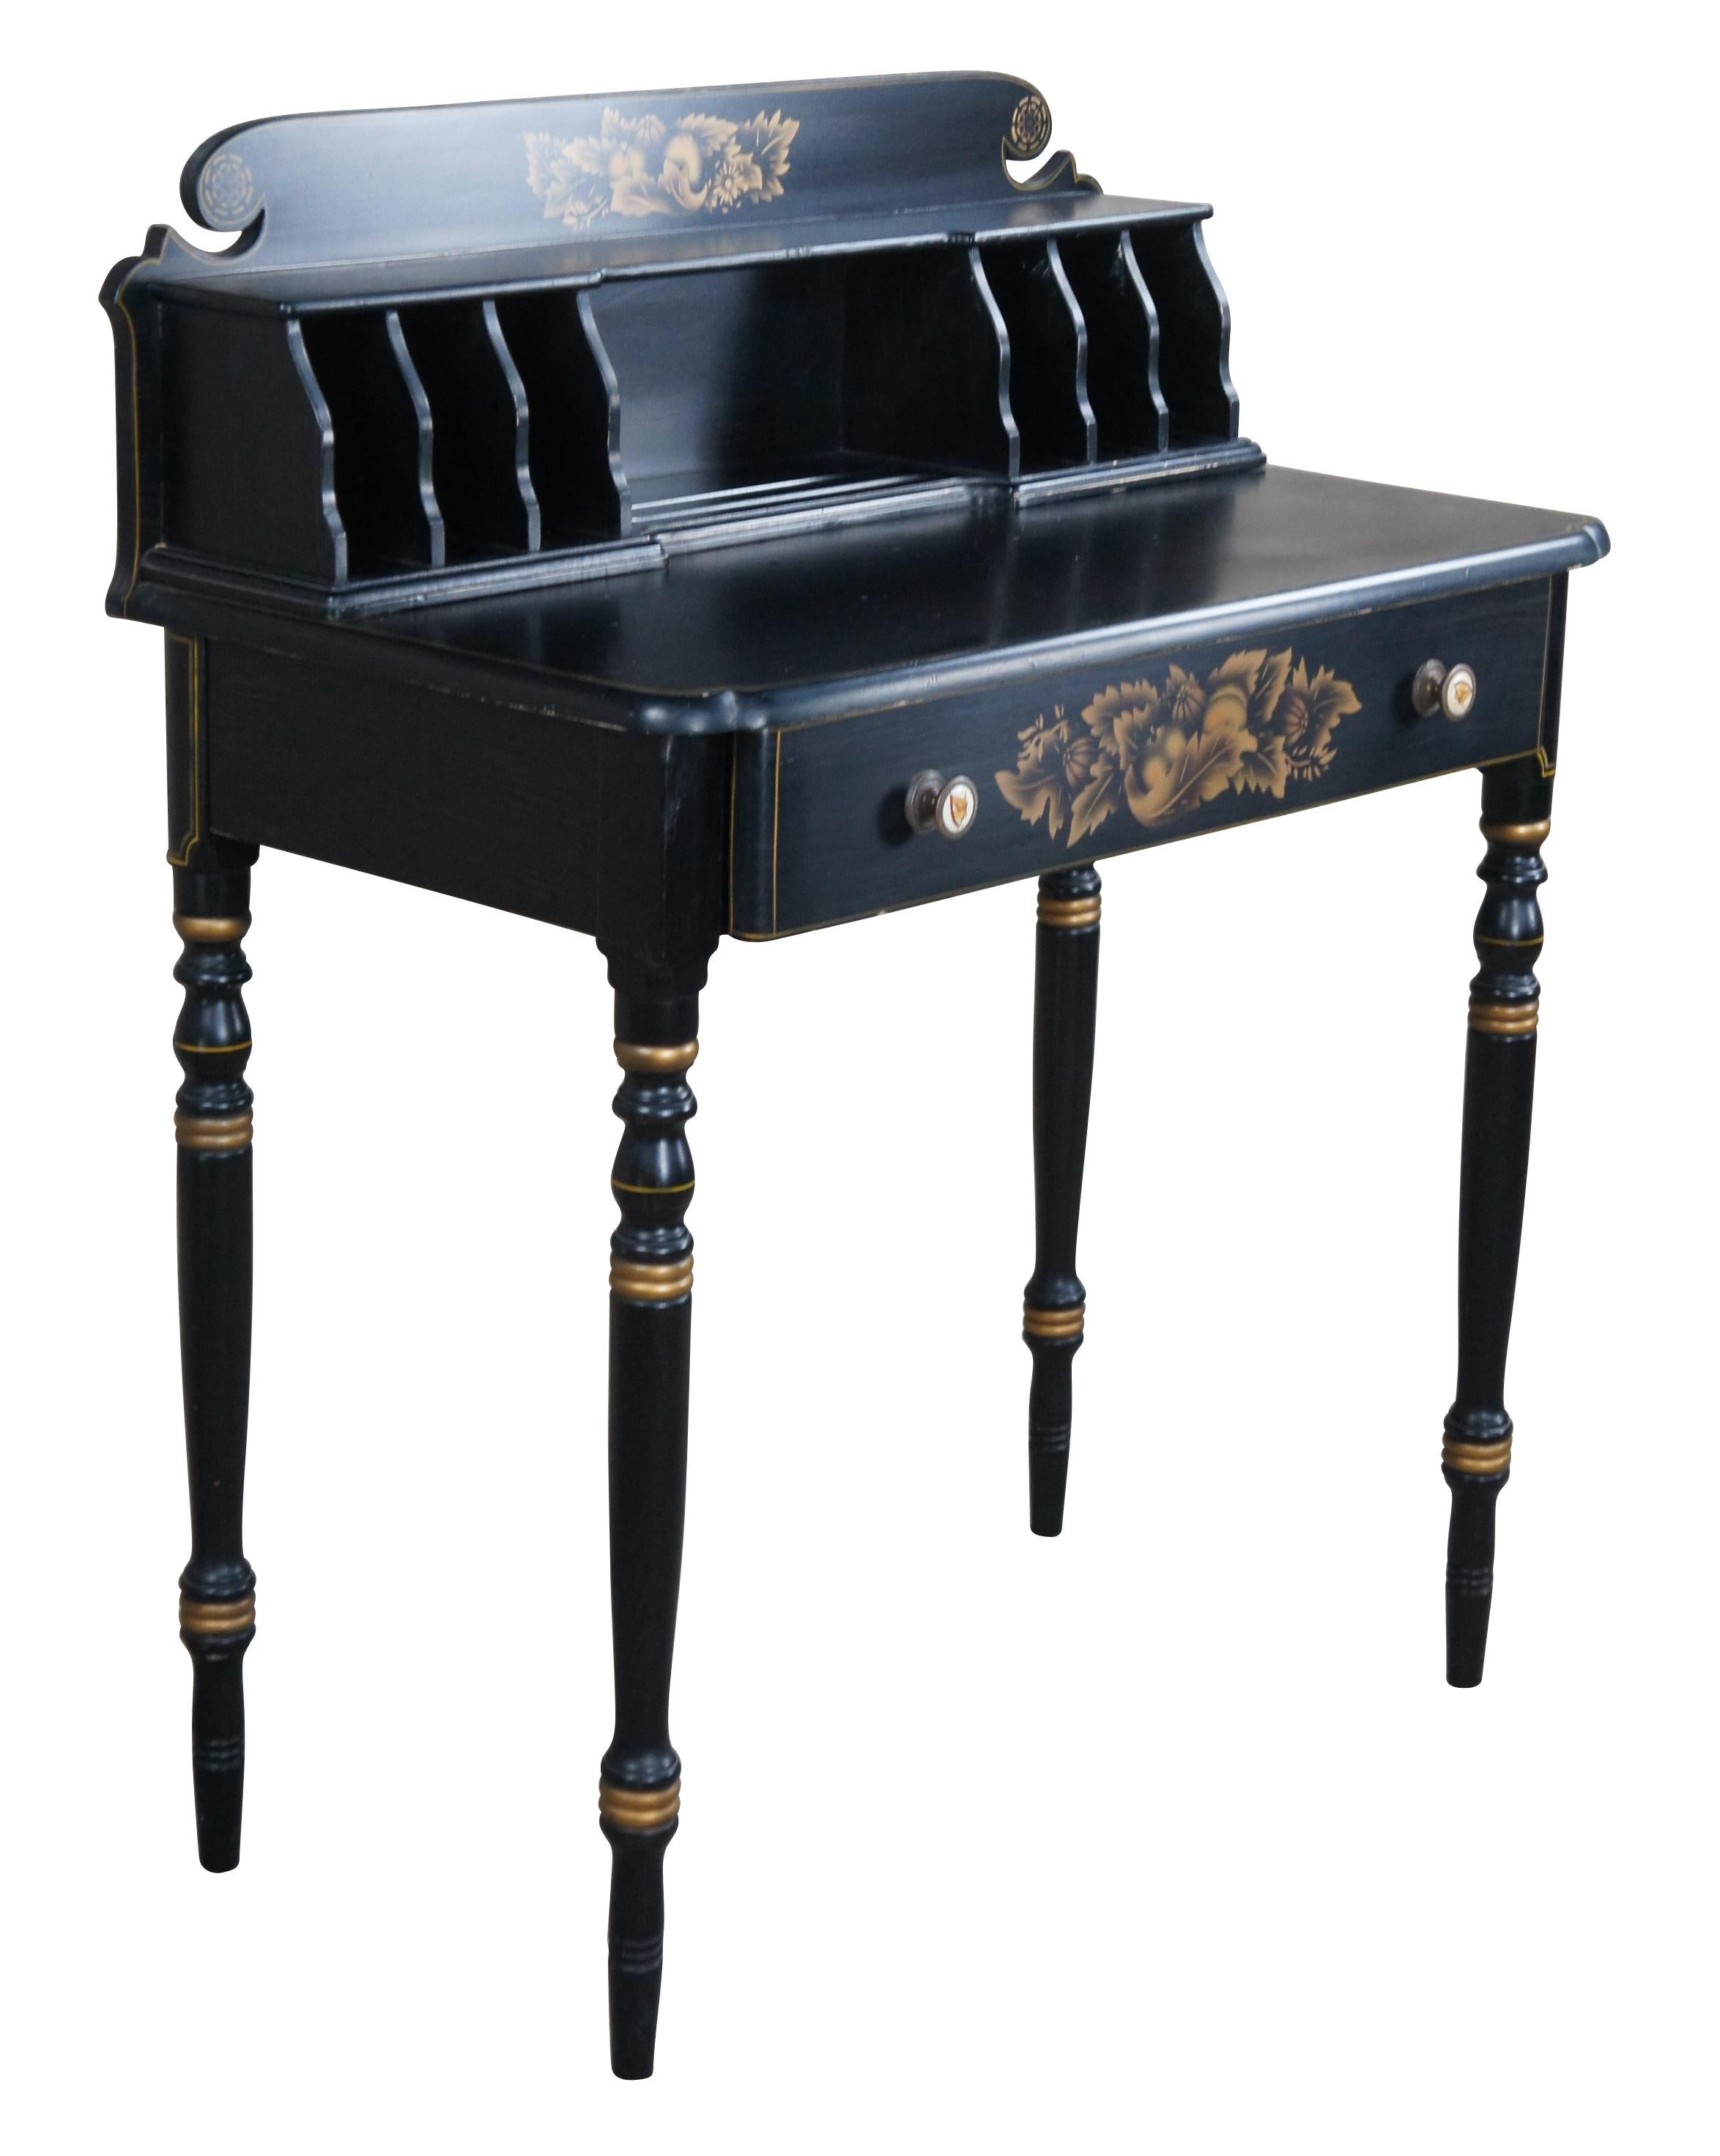 Mid 20th Century Lambert Hitchcock Black Forest stenciled ladies' secretary writing desk or console table. Made of maple featuring black ebonized finish with gold accents and stenciled arrangement of gourds and vegetables. Includes porcelain knobs